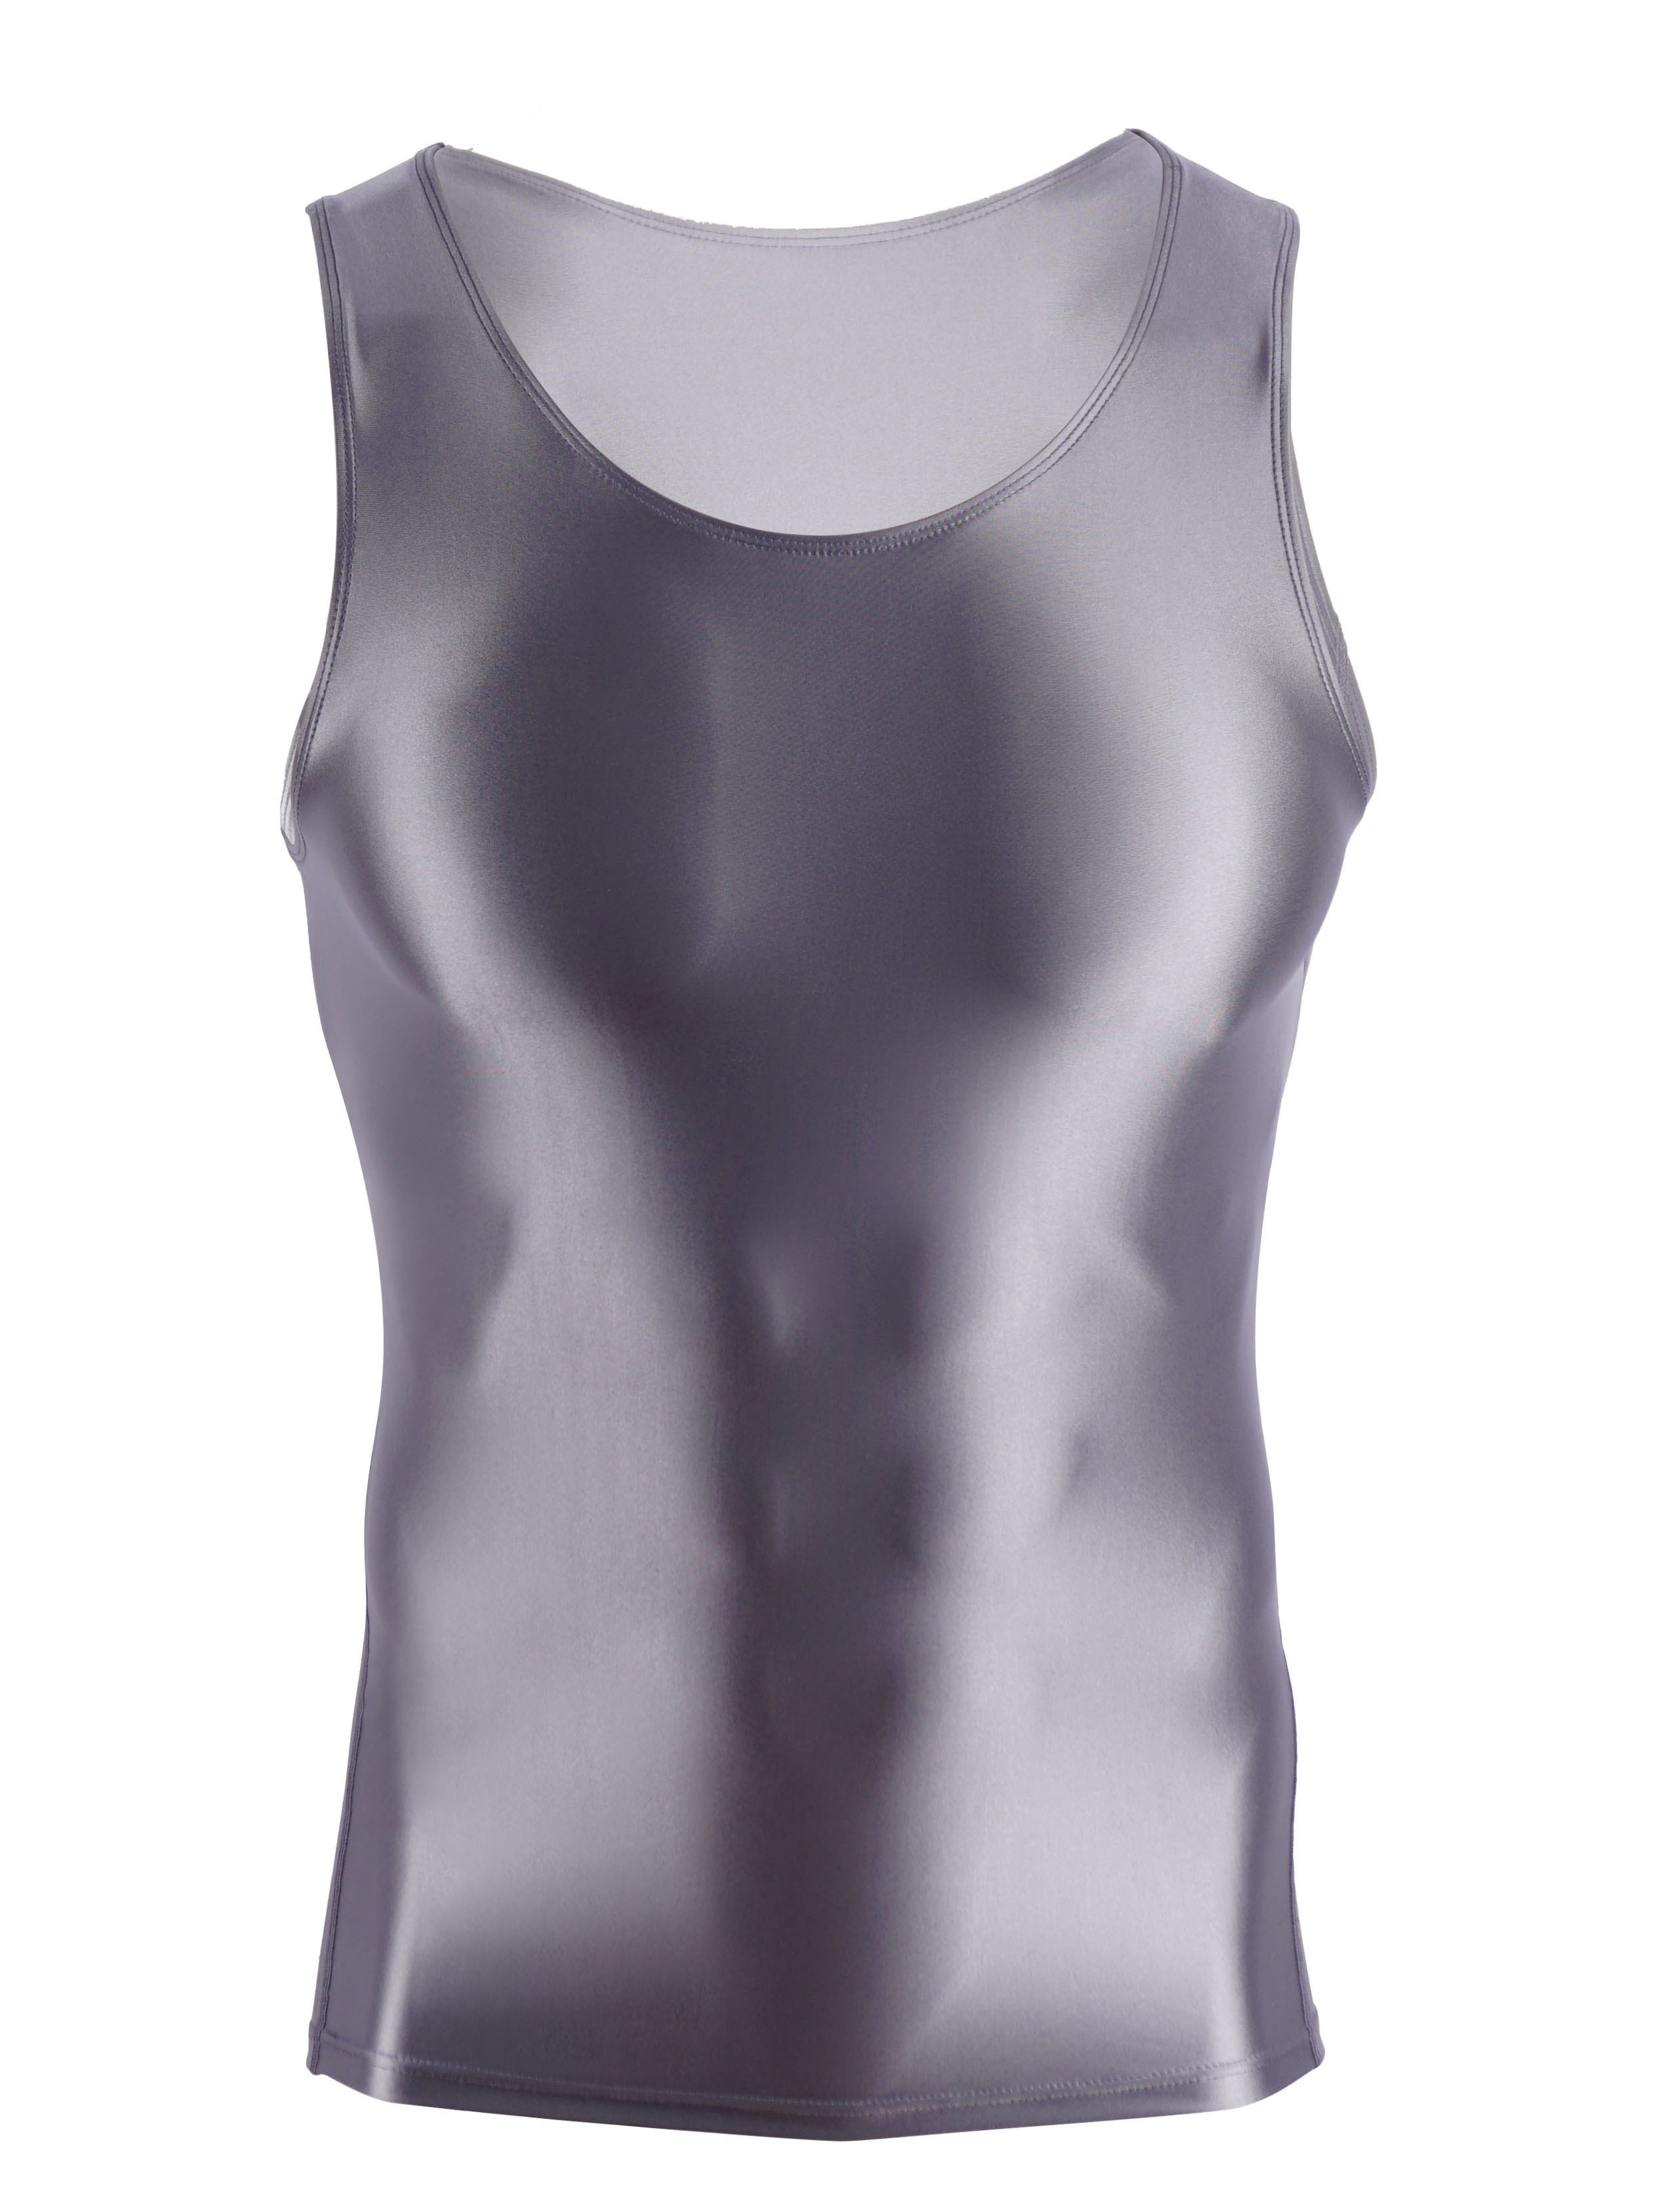 Sleeveless Compression Shirt for Men, Quick-drying Athletic